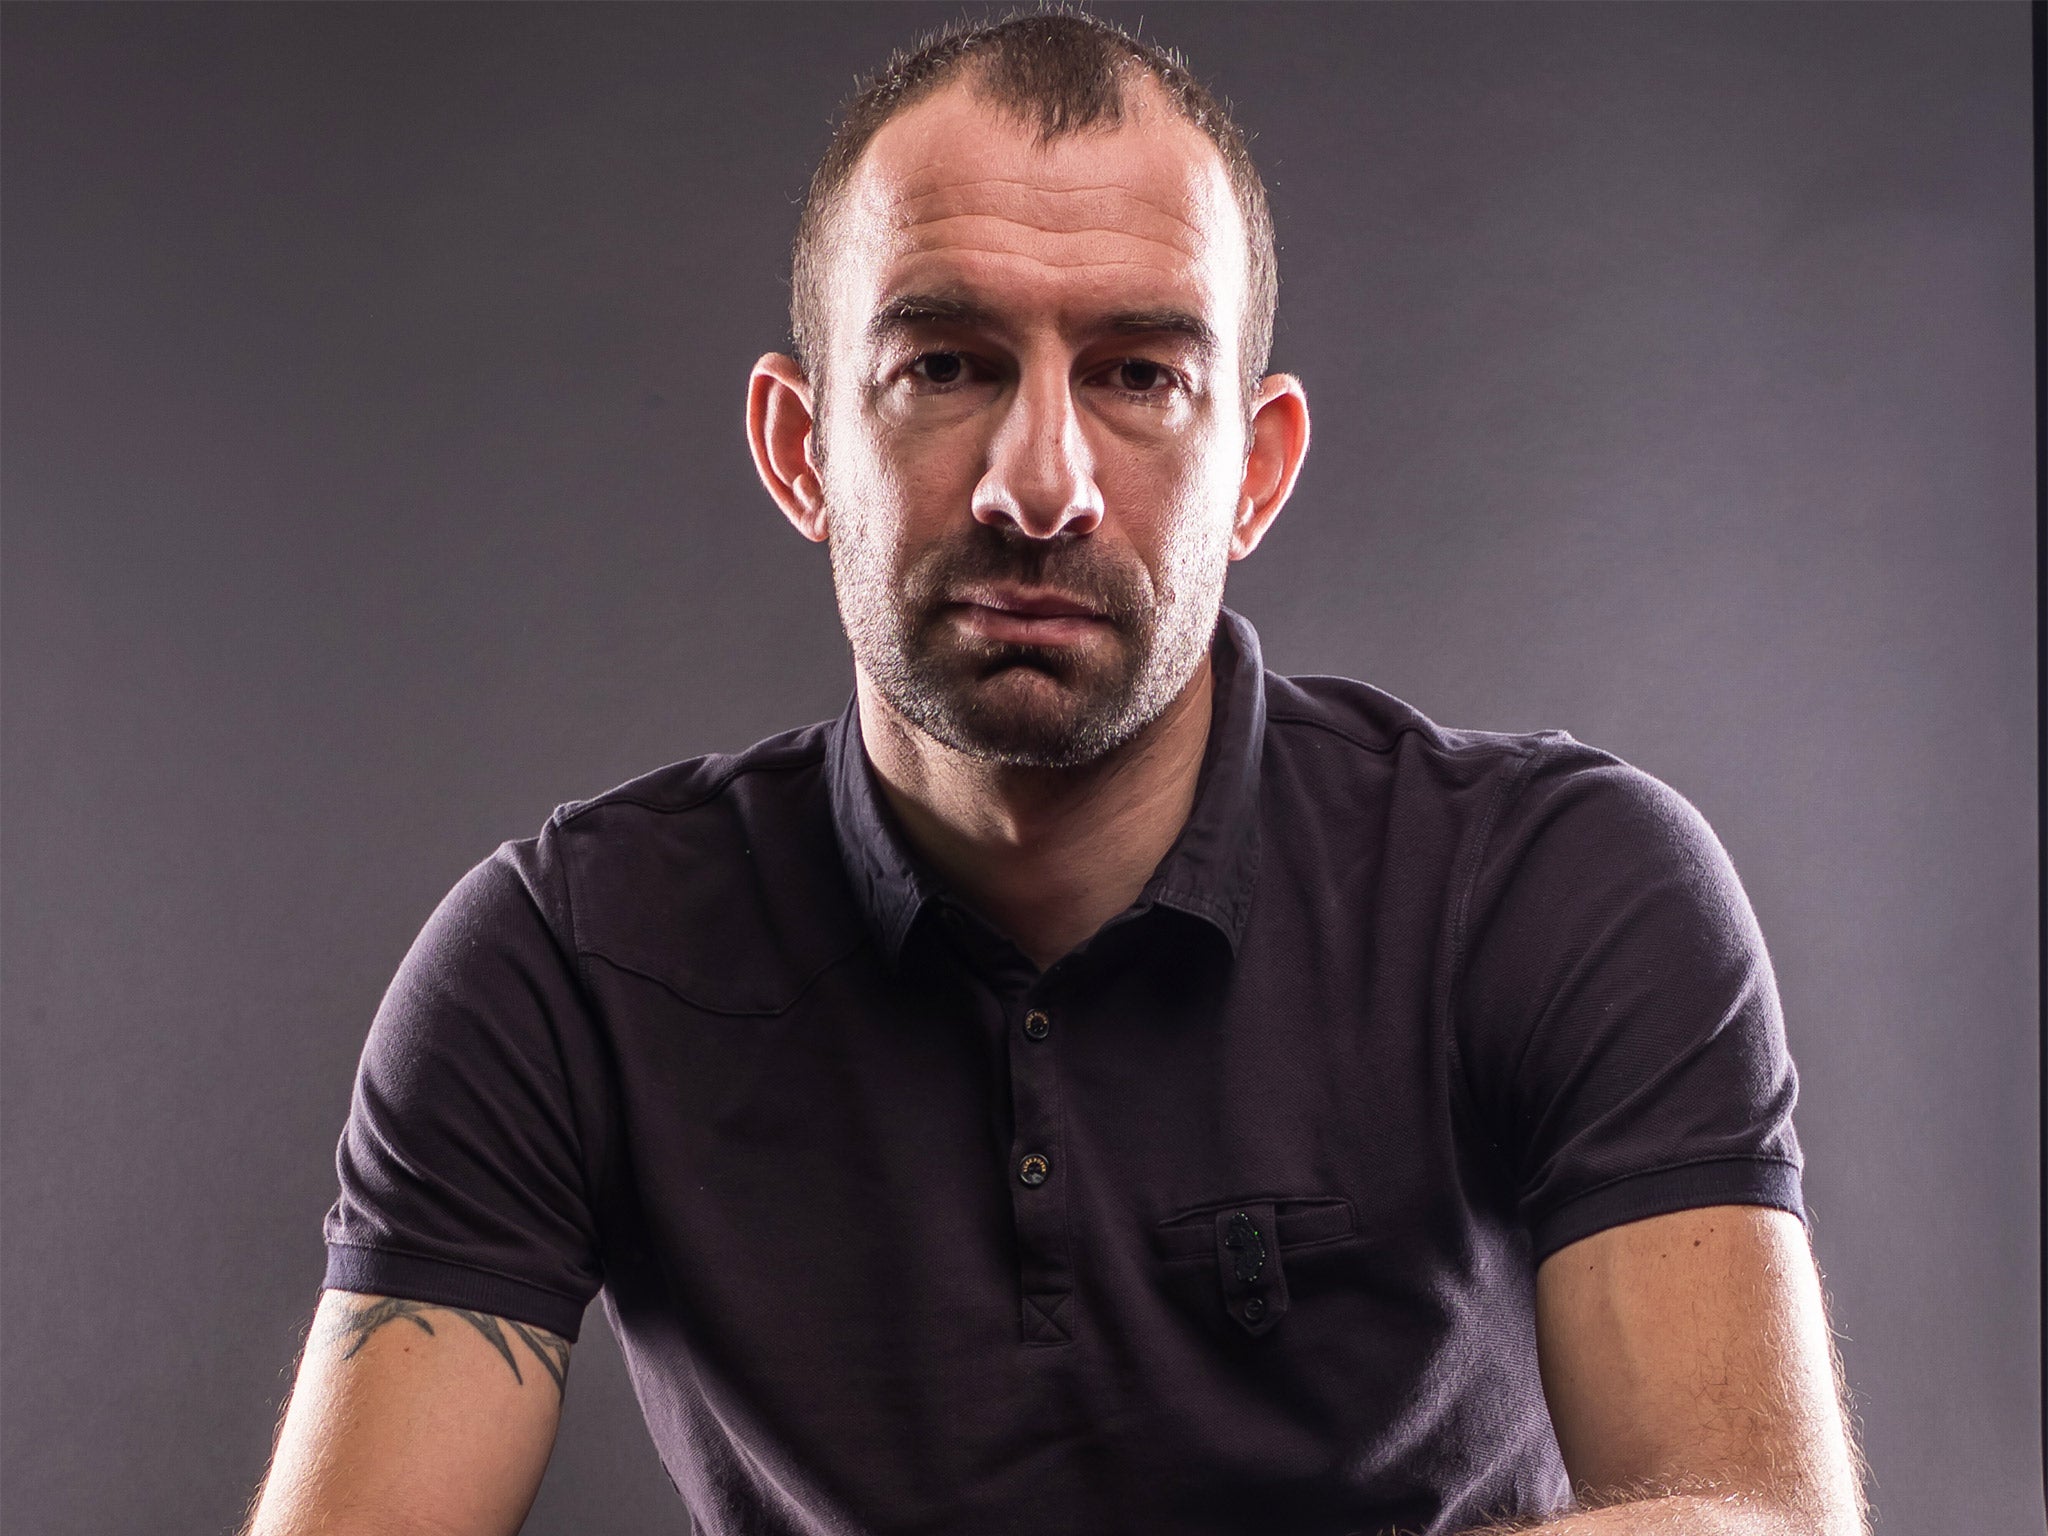 ‘I’d seen too many others outstay their welcome. I told myself I’d never do the same,’ says Danny Higginbotham of his time with Manchester United